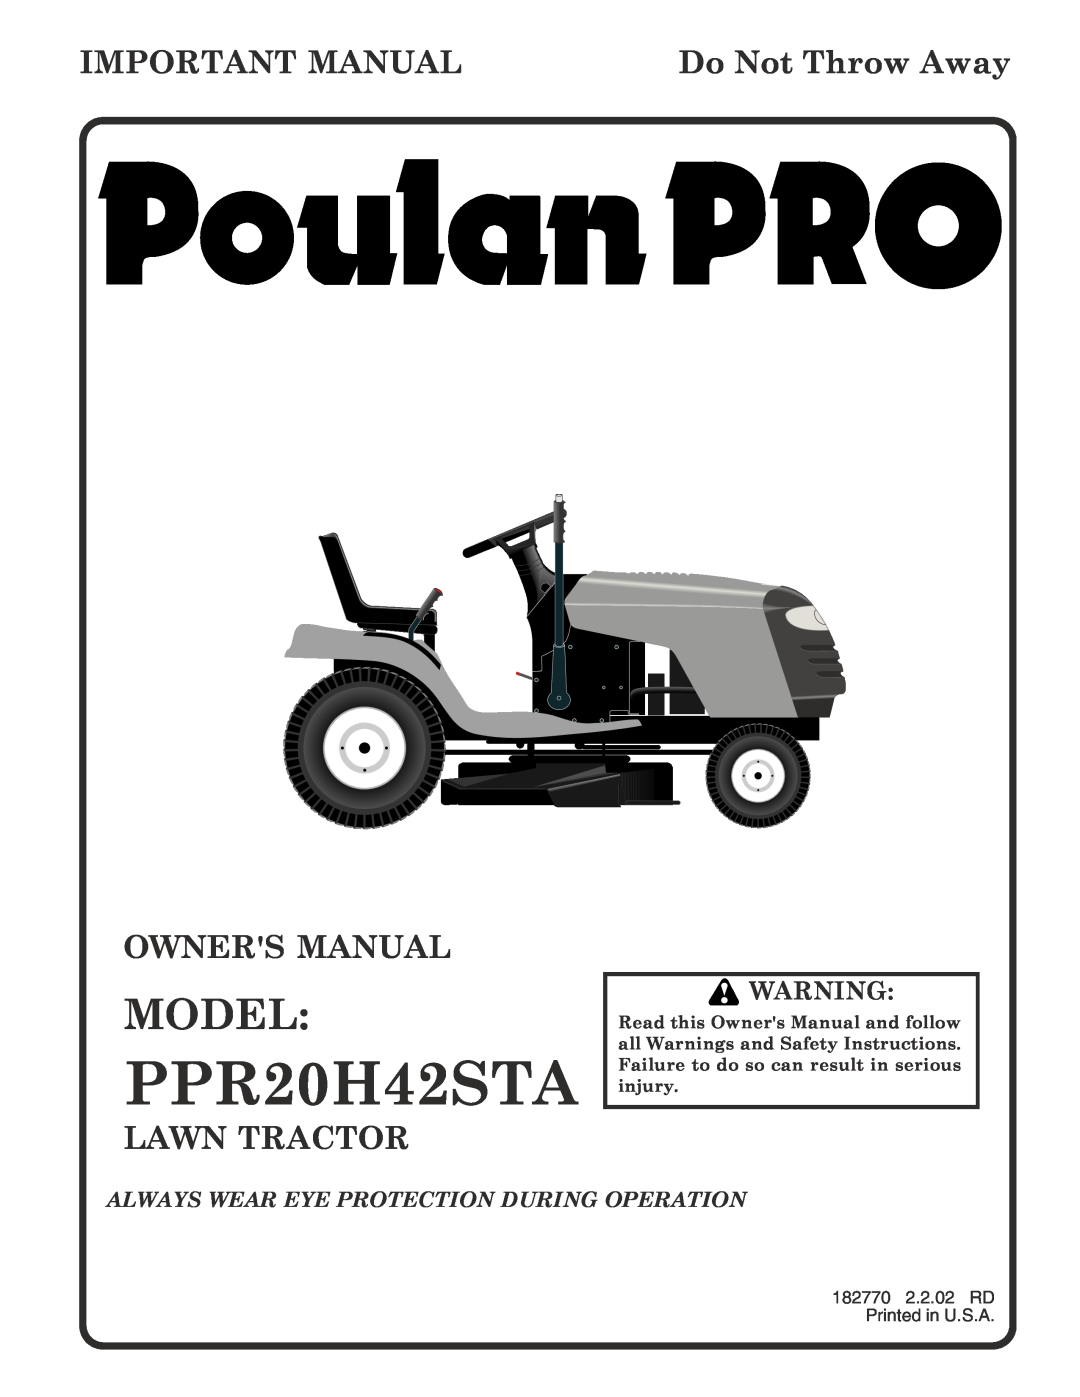 Poulan 182770 owner manual Model, PPR20H42STA, Important Manual, Do Not Throw Away, Lawn Tractor 